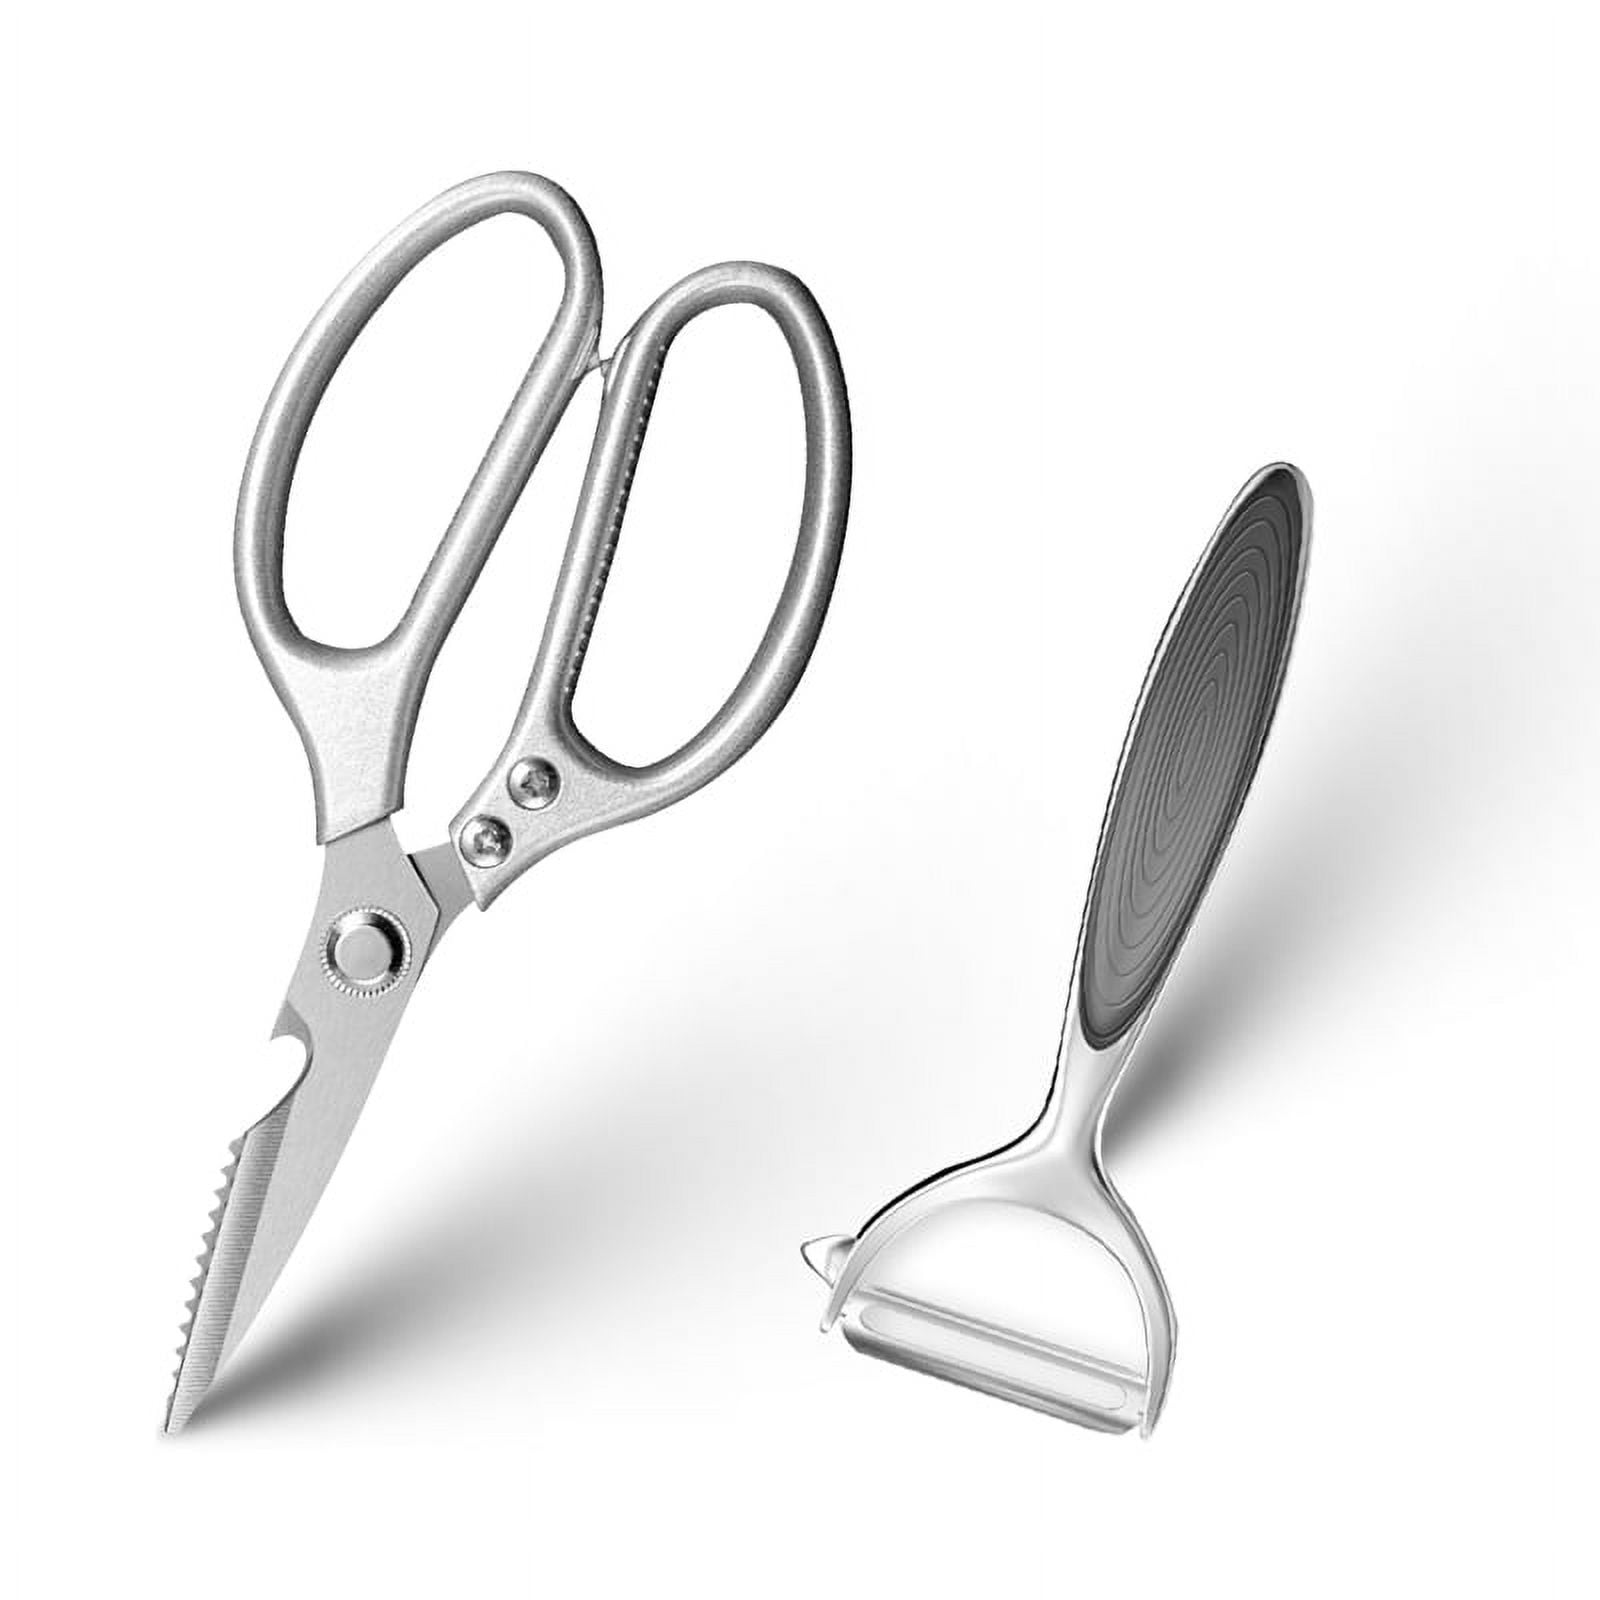 Kitchen Scissors Stainless-Steel Multi-Purpose Heavy-Duty Dishwasher Safe Scissors for Cutting Chicken, Poultry, Seafood, Meat, Vegetables, Herbs, Fo